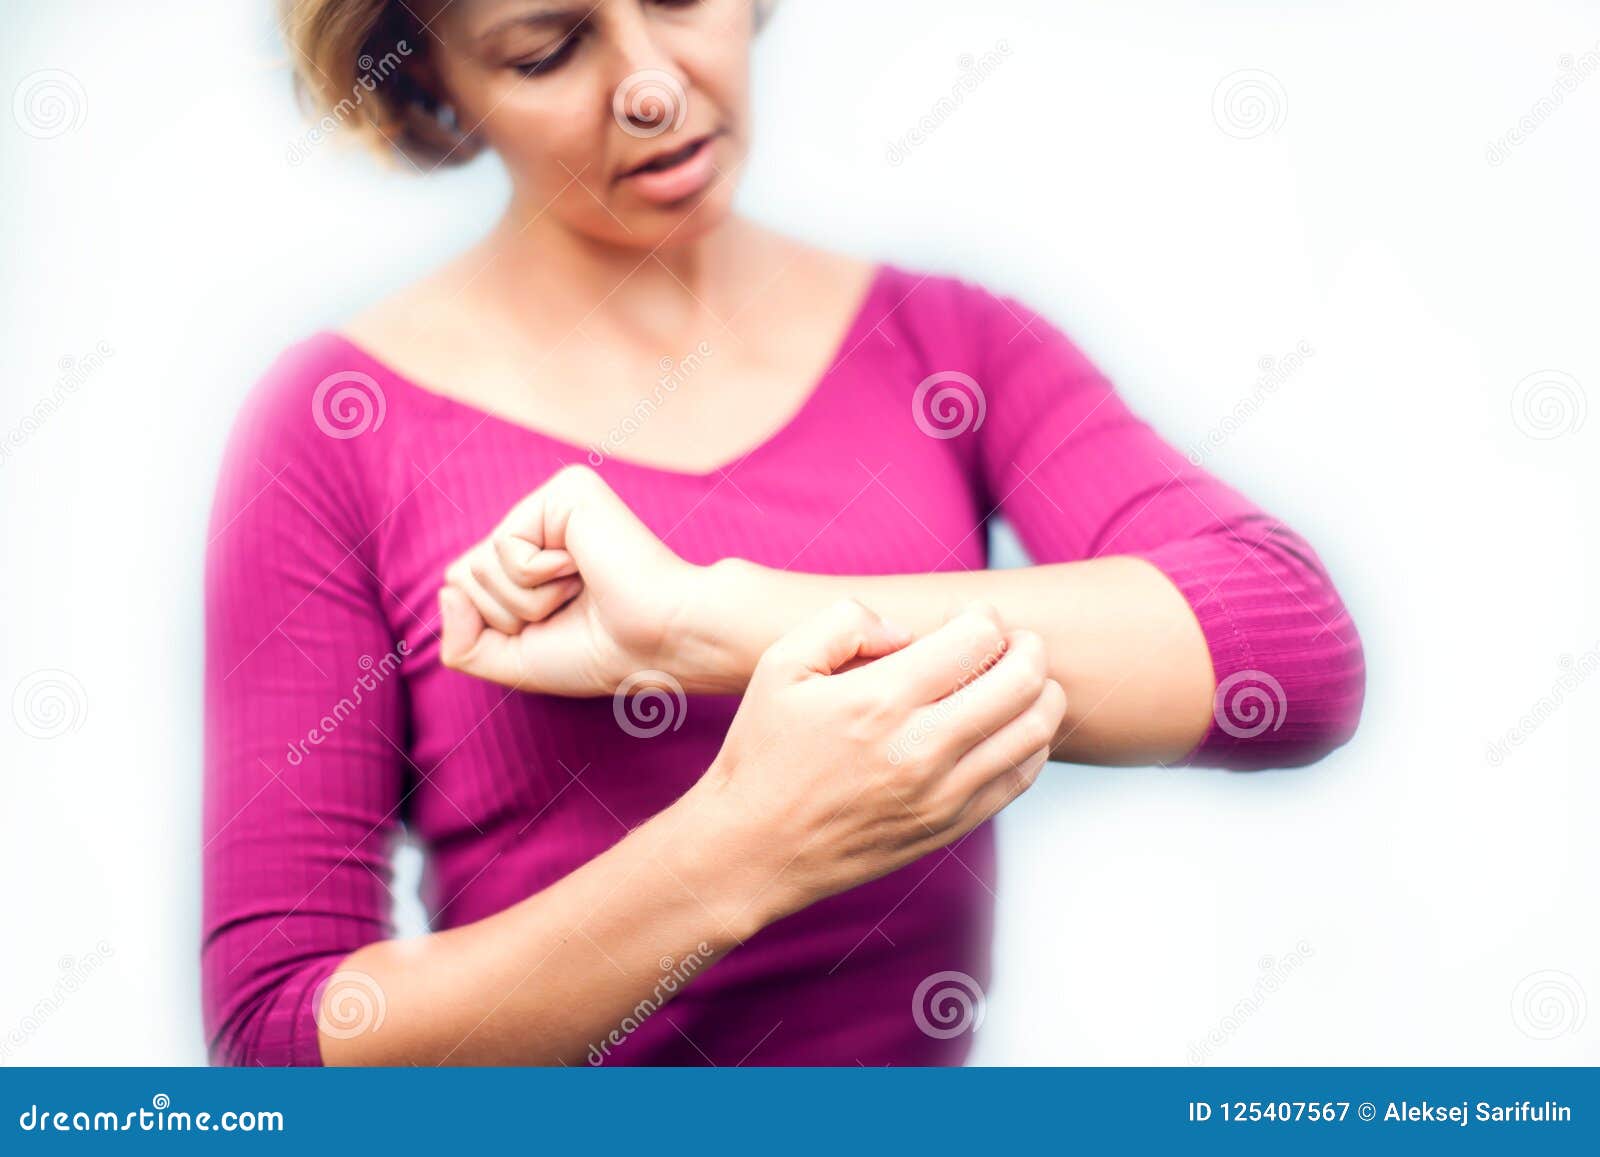 people, healthcare, dermatology, allergy and health problem concept - unhappy woman suffering from hand inch 